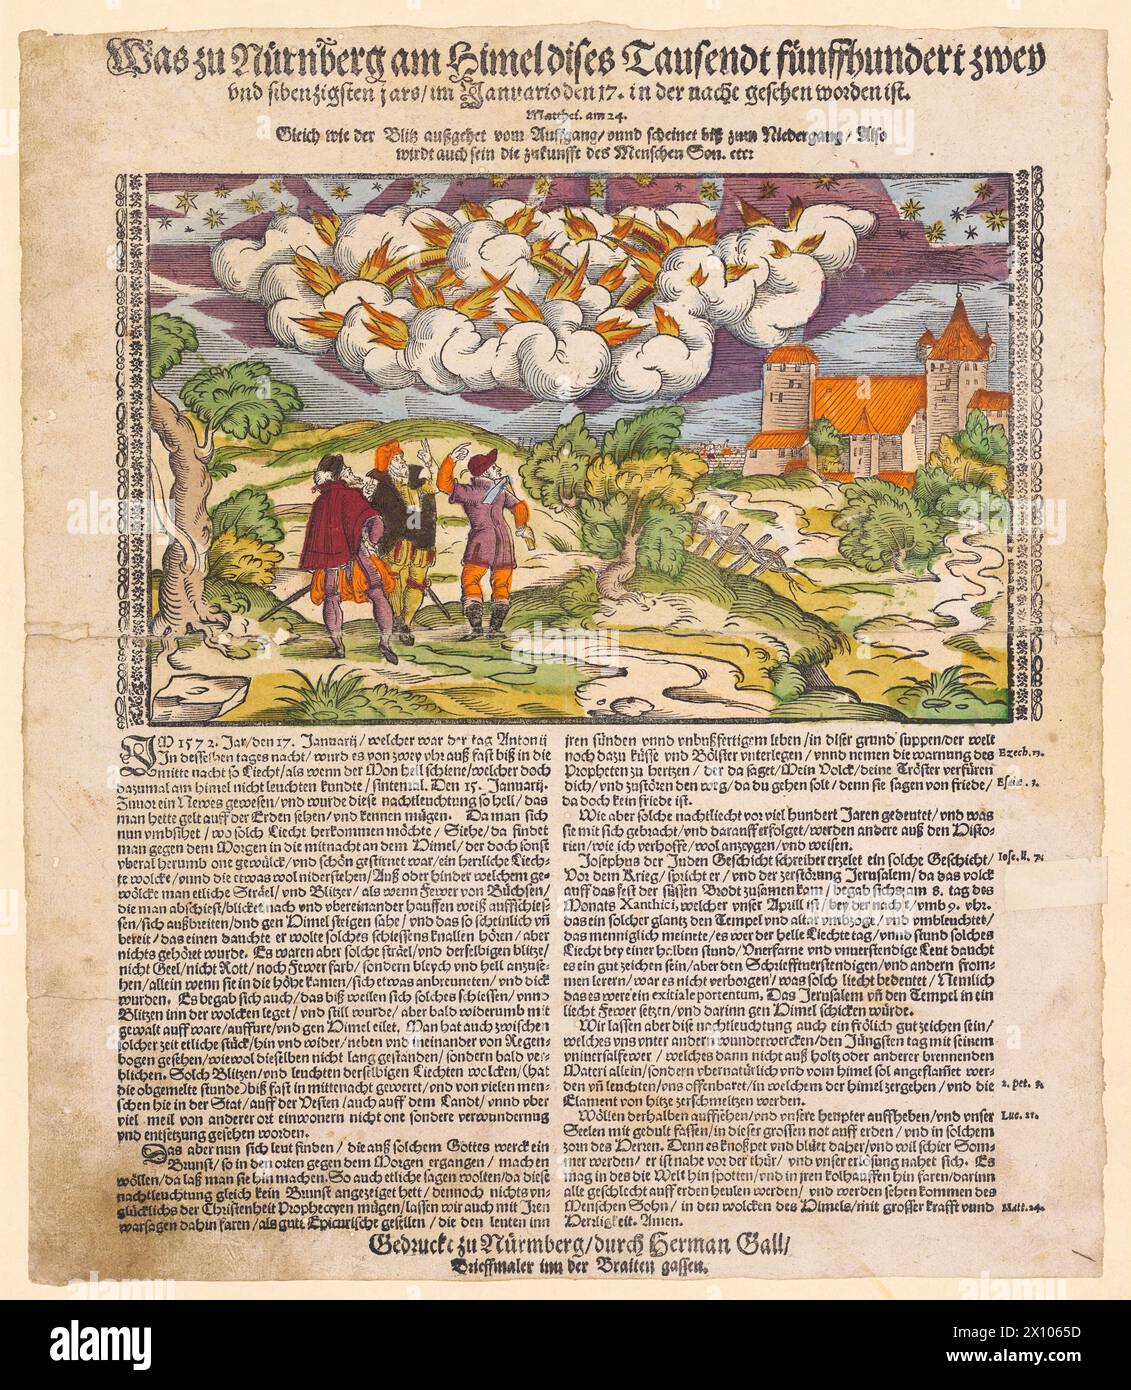 Vintage German Woodcut, 16th century depicting Celestial Phenomena. Report of a northern light over Nuremberg on January 17, 1572, in the evening from eight o'clock to around midnight. The description is at once empirical and theological.  The author compares the Northern Lights with the heavenly glow above the Temple of Jerusalem and interprets the event as a divine sign of the eschatological fire of the impending Last Judgment. Source: Zentralbibliothek Zürich, PAS II 9/1 Stock Photo